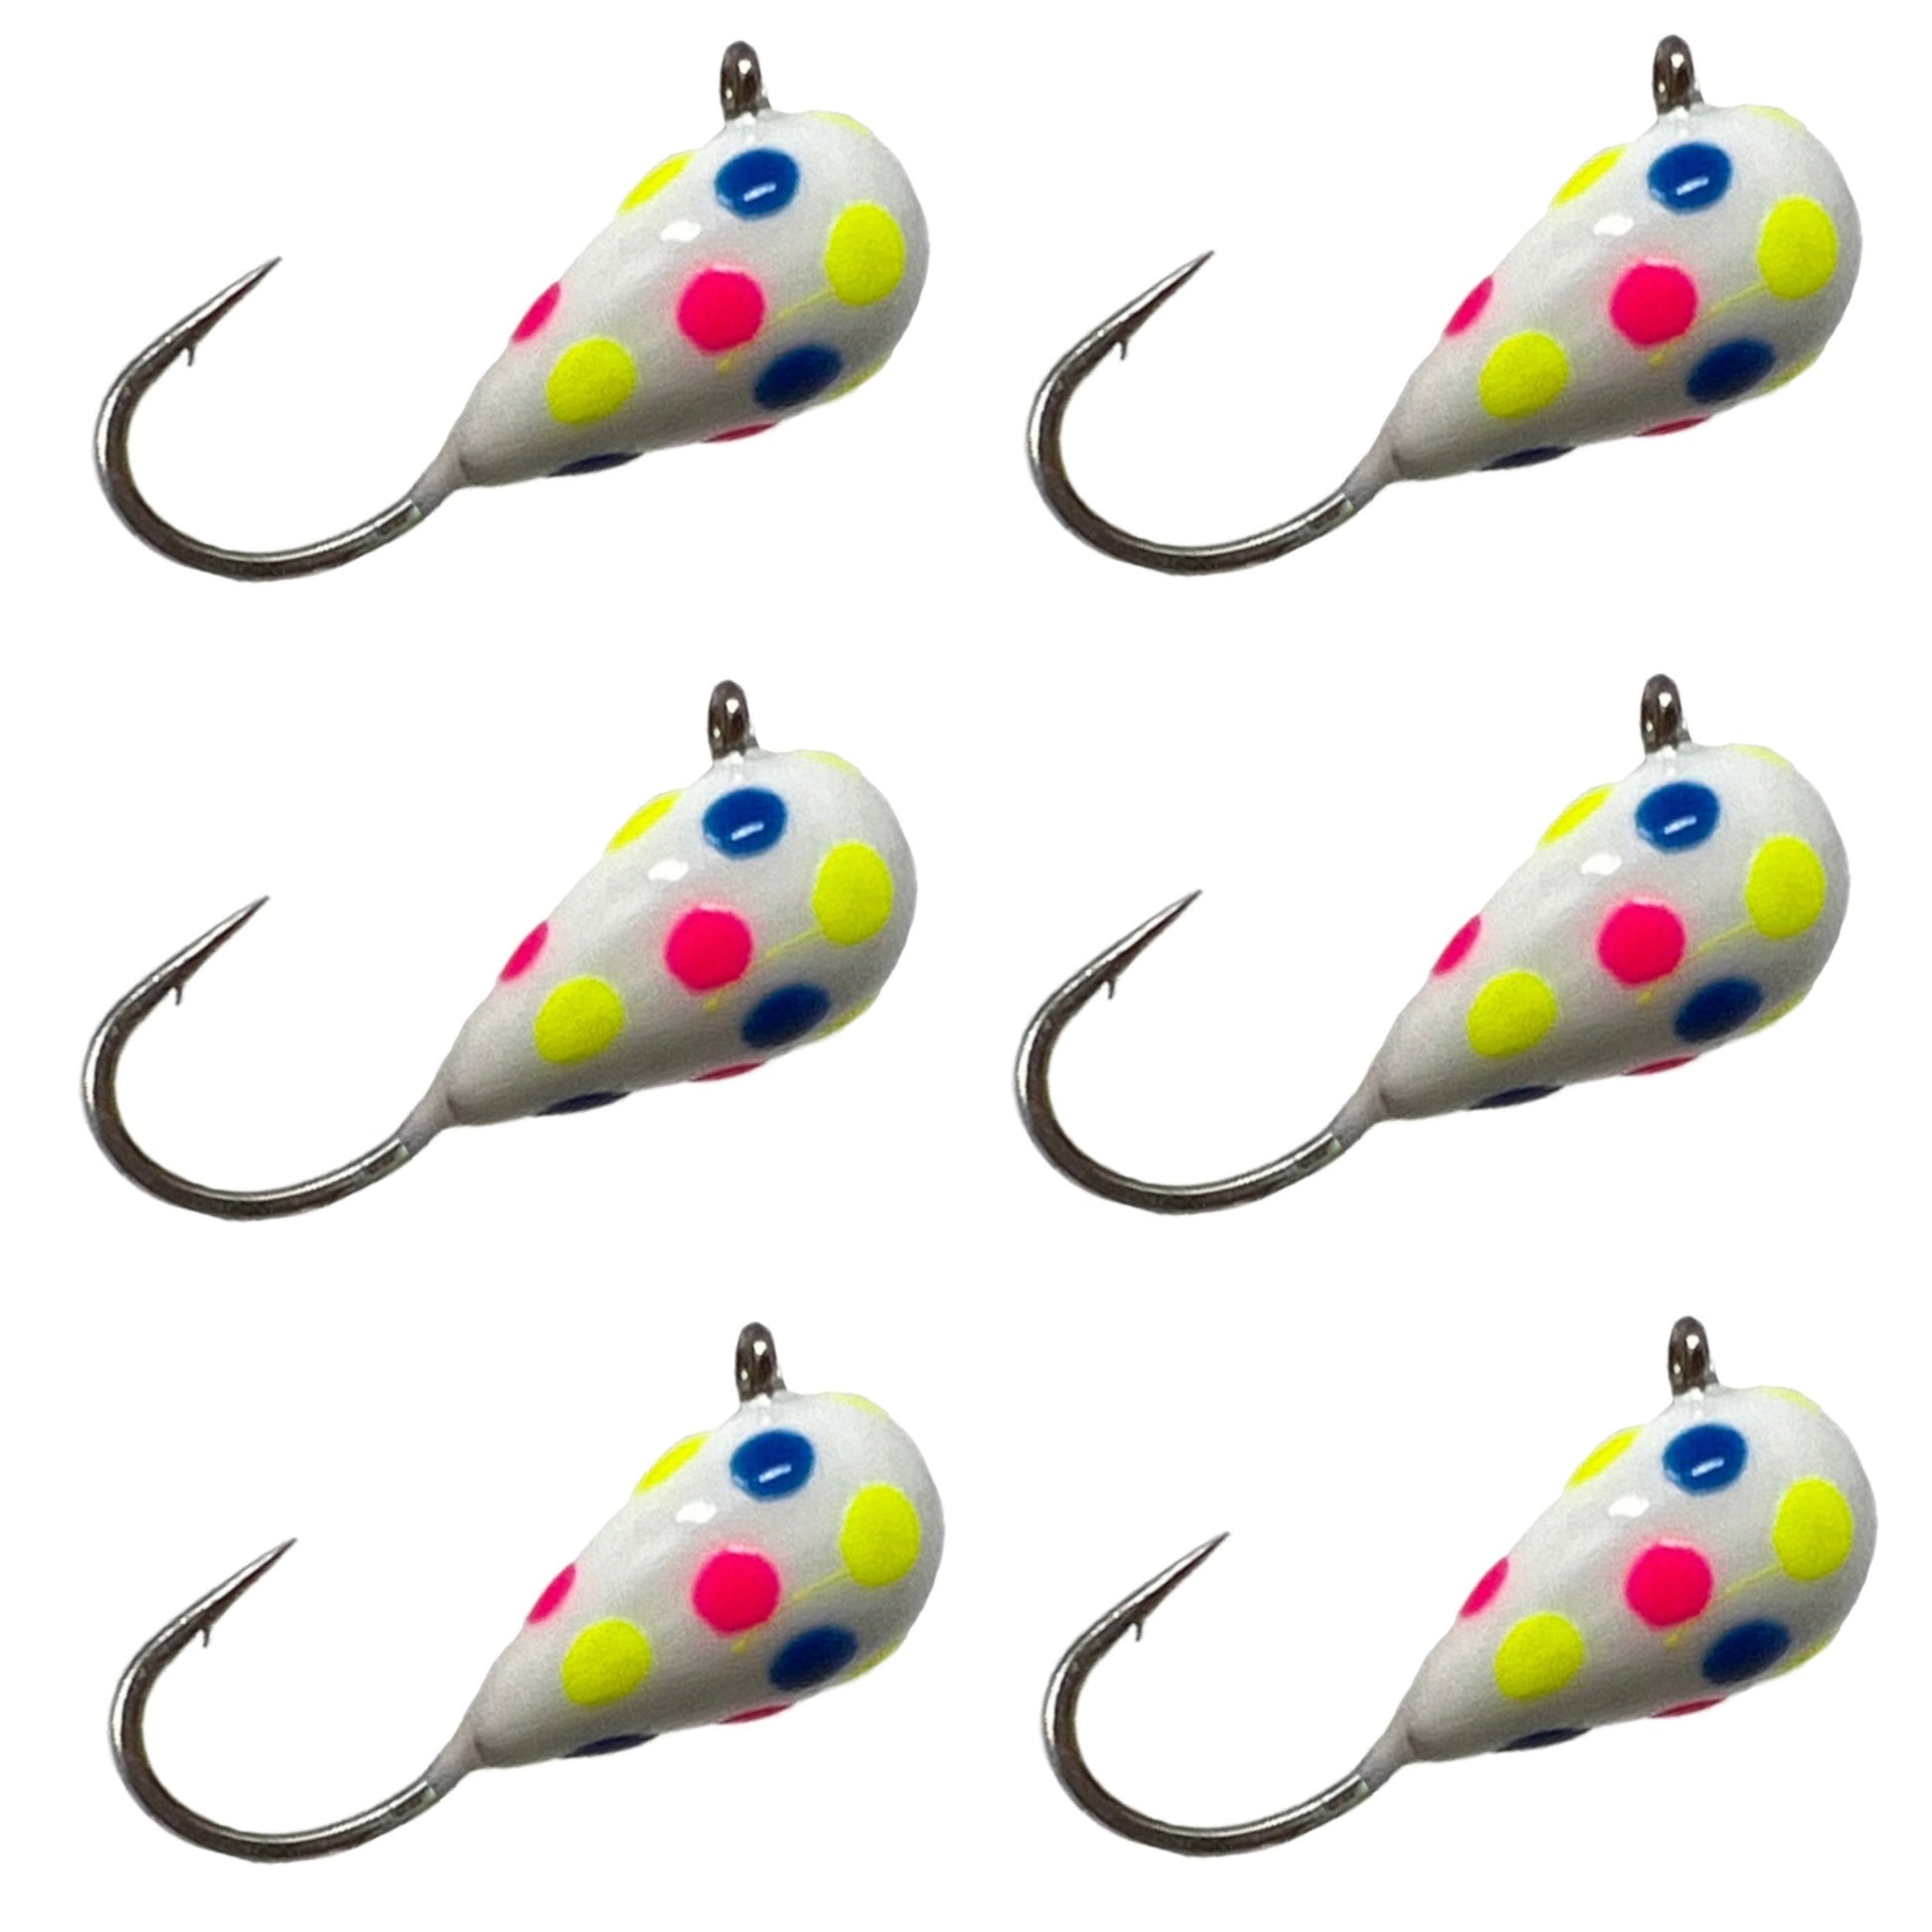 11 NEW GILL PILL PANFISH JIGS FISHING ice SIZE 12 CRAPPIE glow for rod reel  